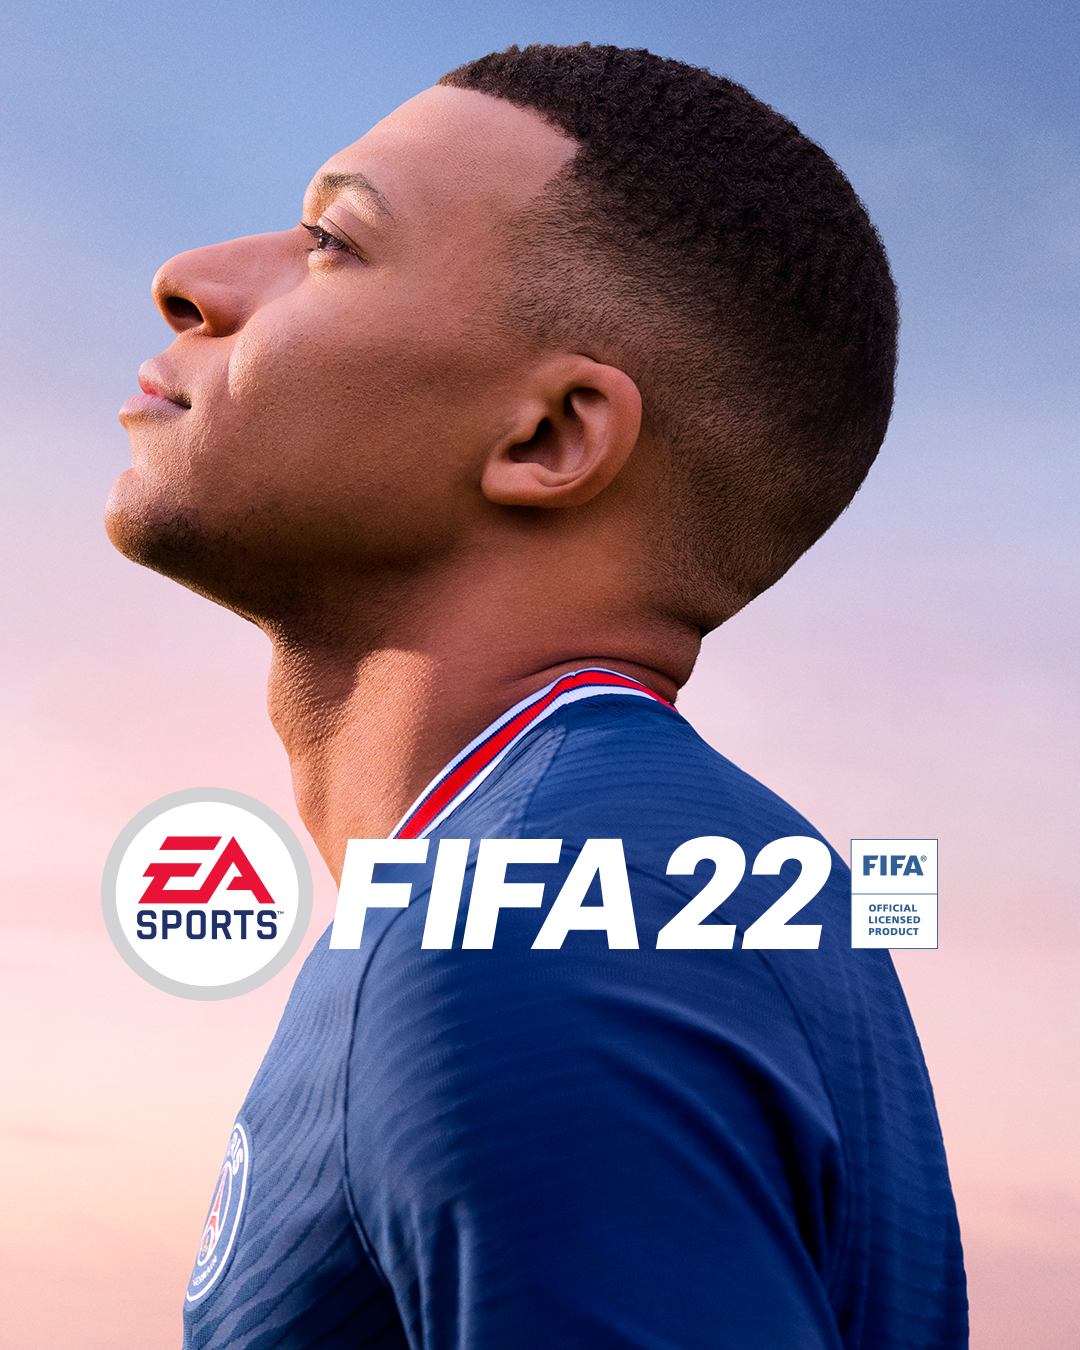 Image for Kylian Mbappe will grace the cover of FIFA 22